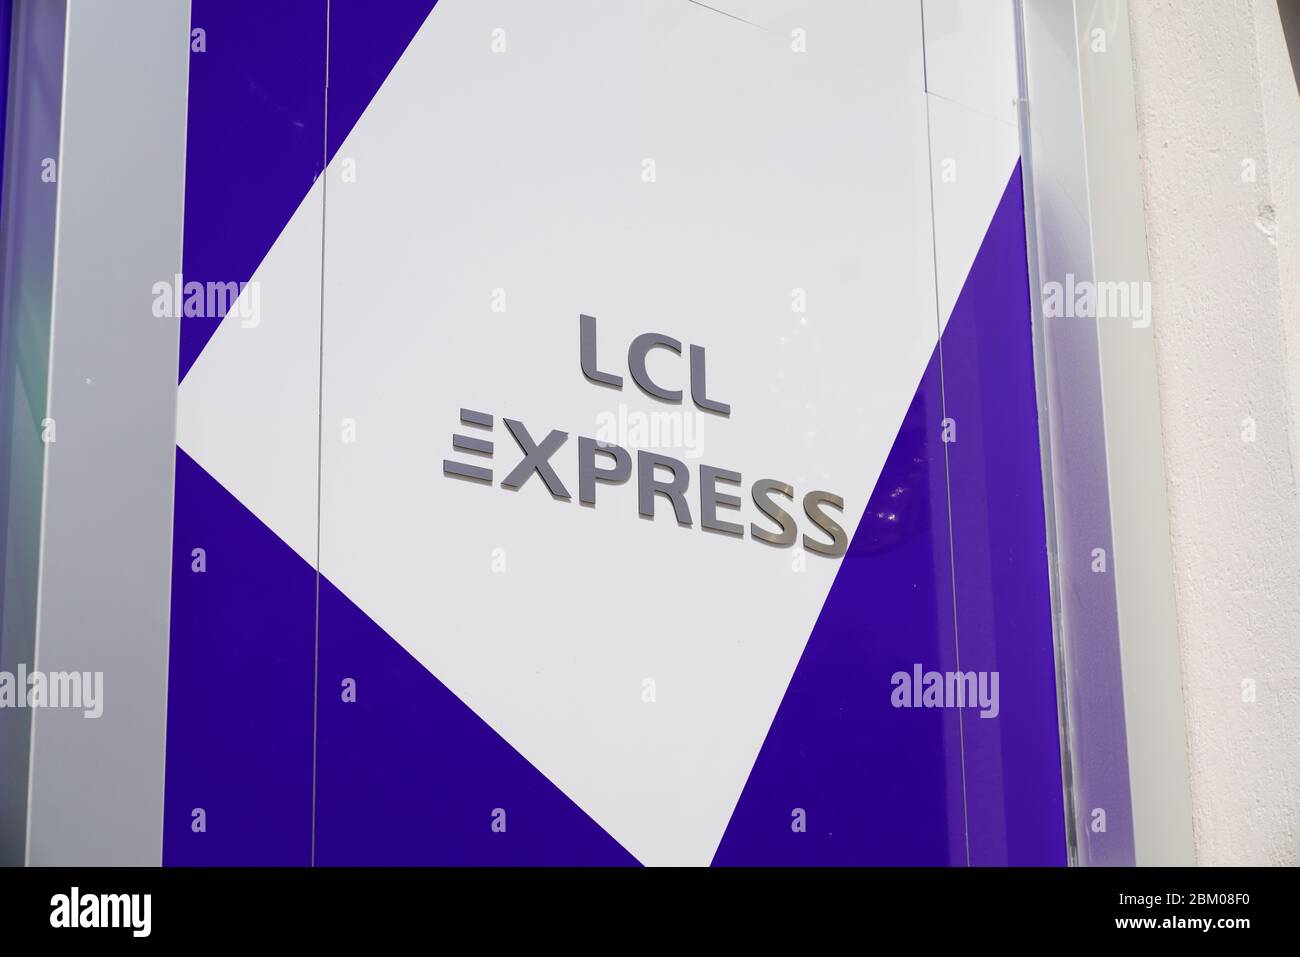 Bordeaux , Aquitaine / France - 05 04 2020 : lcl express logo sign le credit Lyonnais french bank signage store office Stock Photo